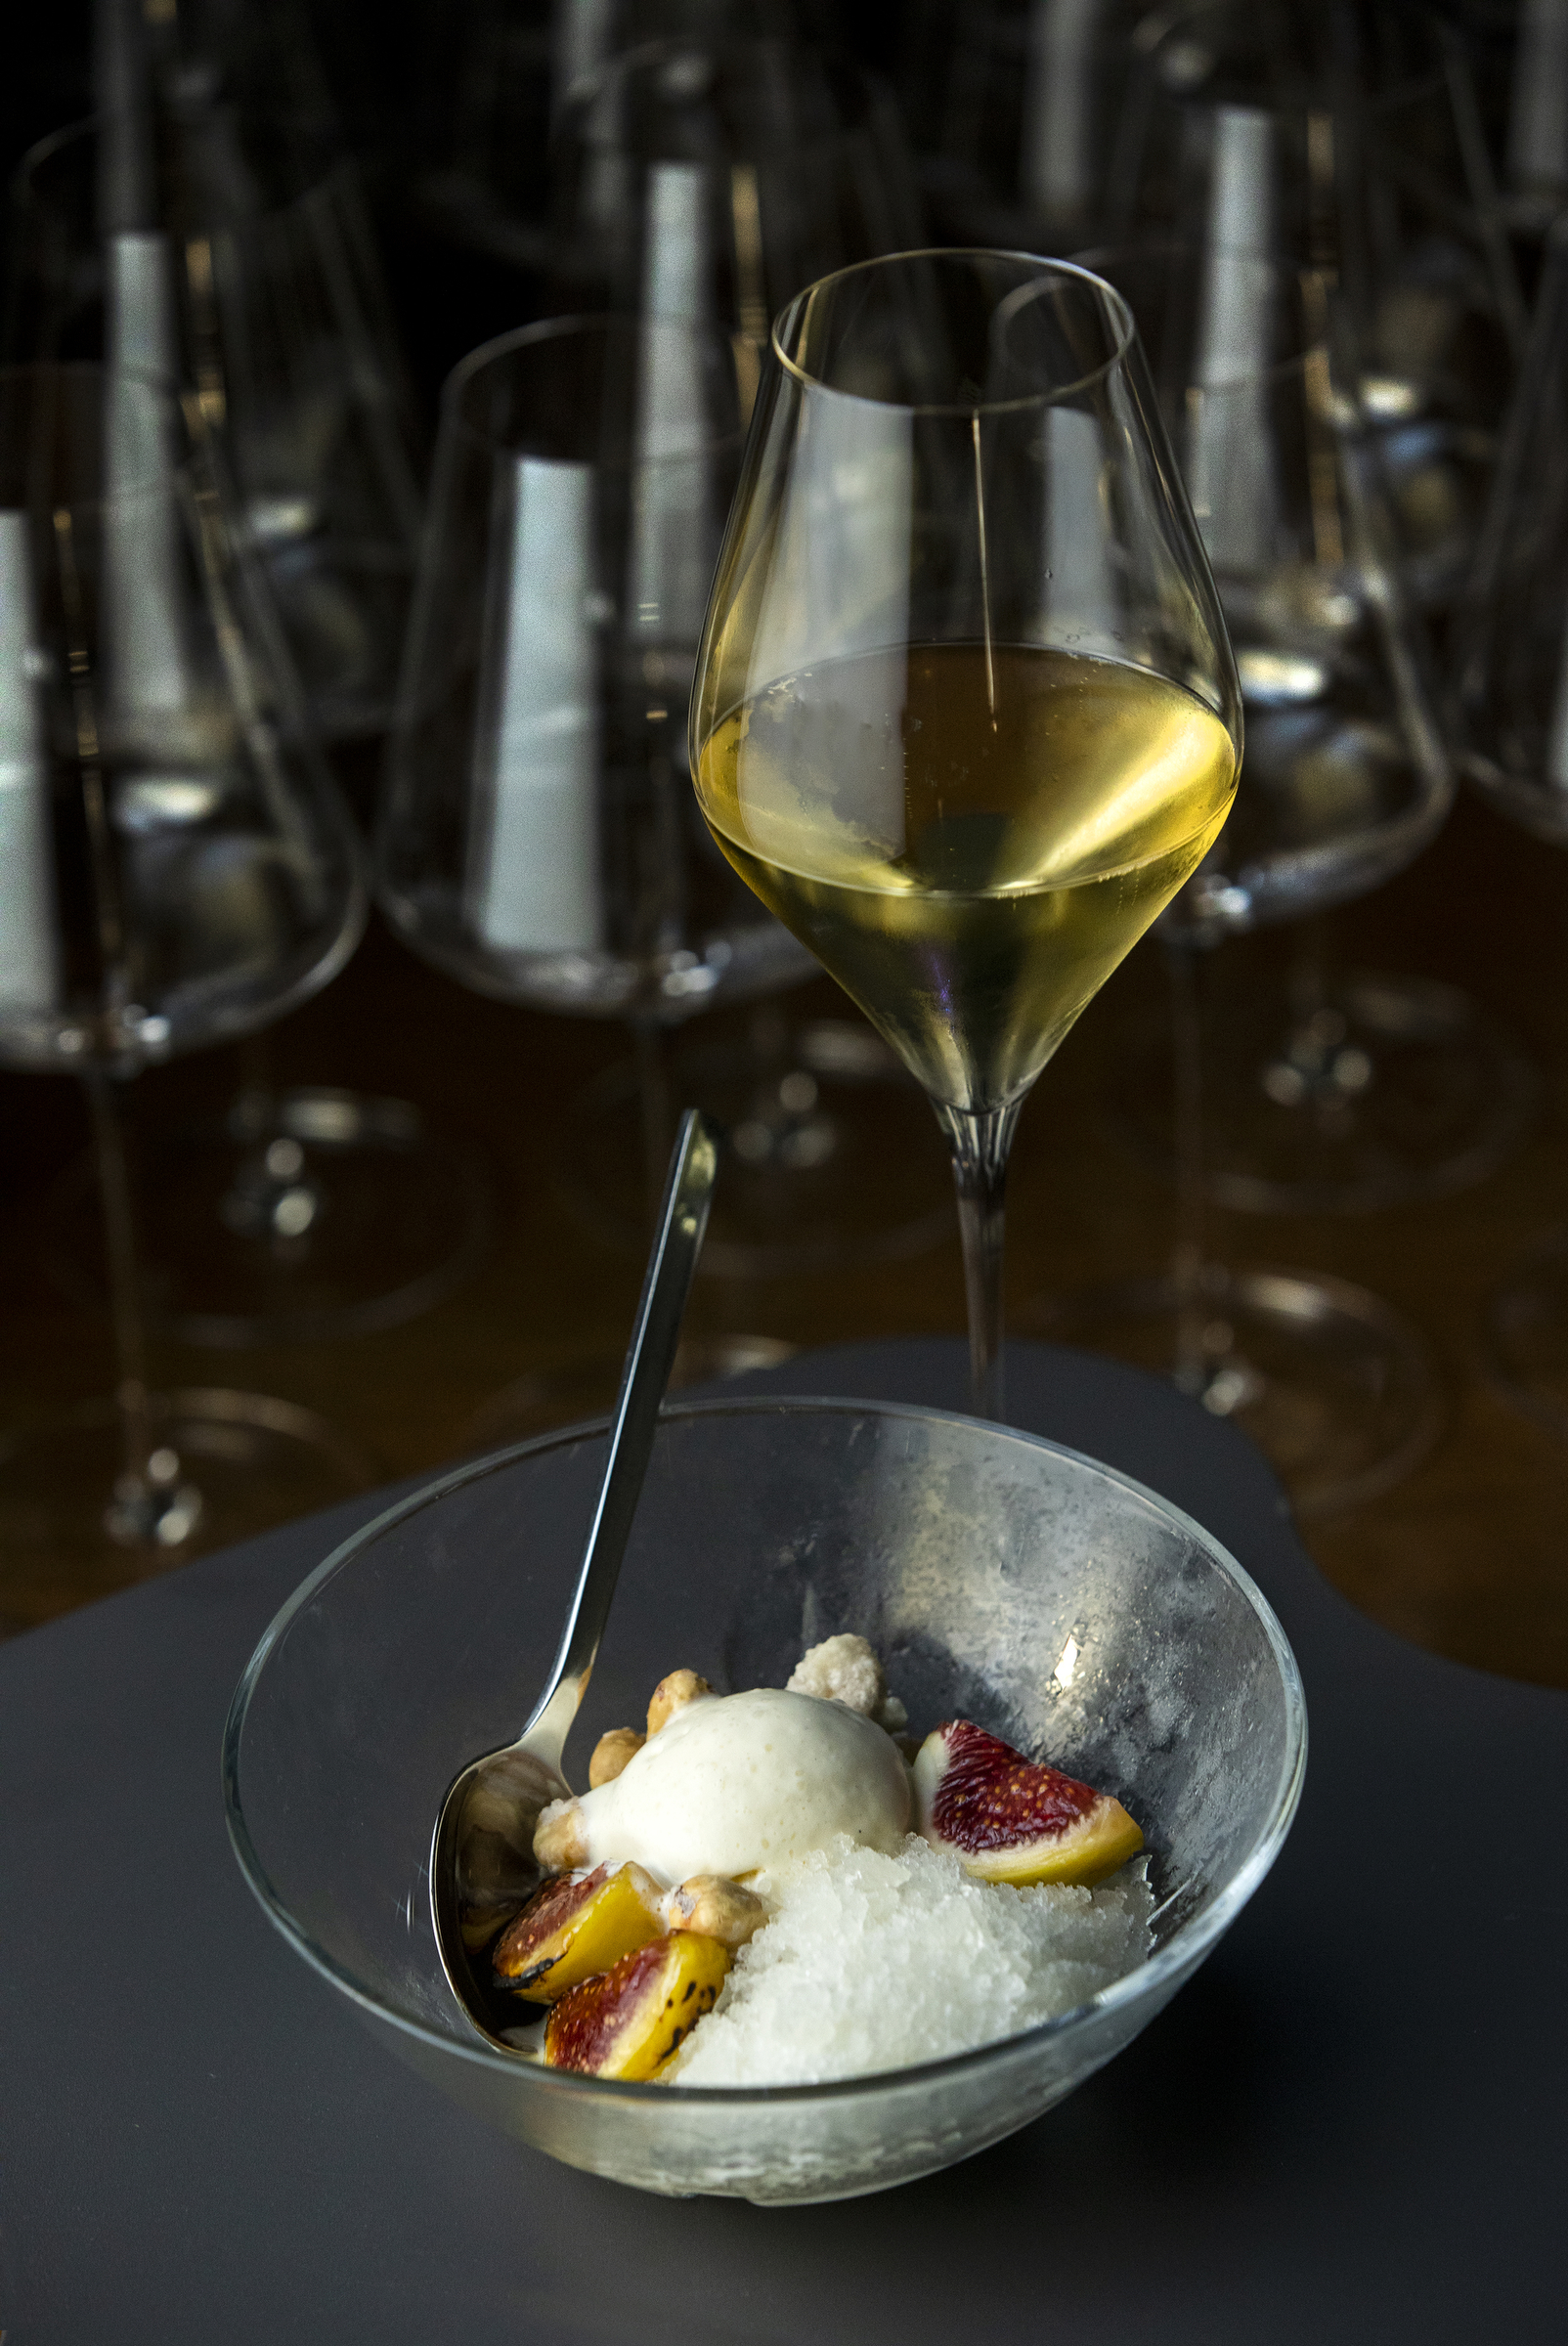 Buttermilk ice cream with plums, candied hazelnuts served with champagne, the fourth course of the ever changing Prix-fixe menu from EDGE restaurant in Sonoma. (Photo by John Burgess/The Press Democrat)